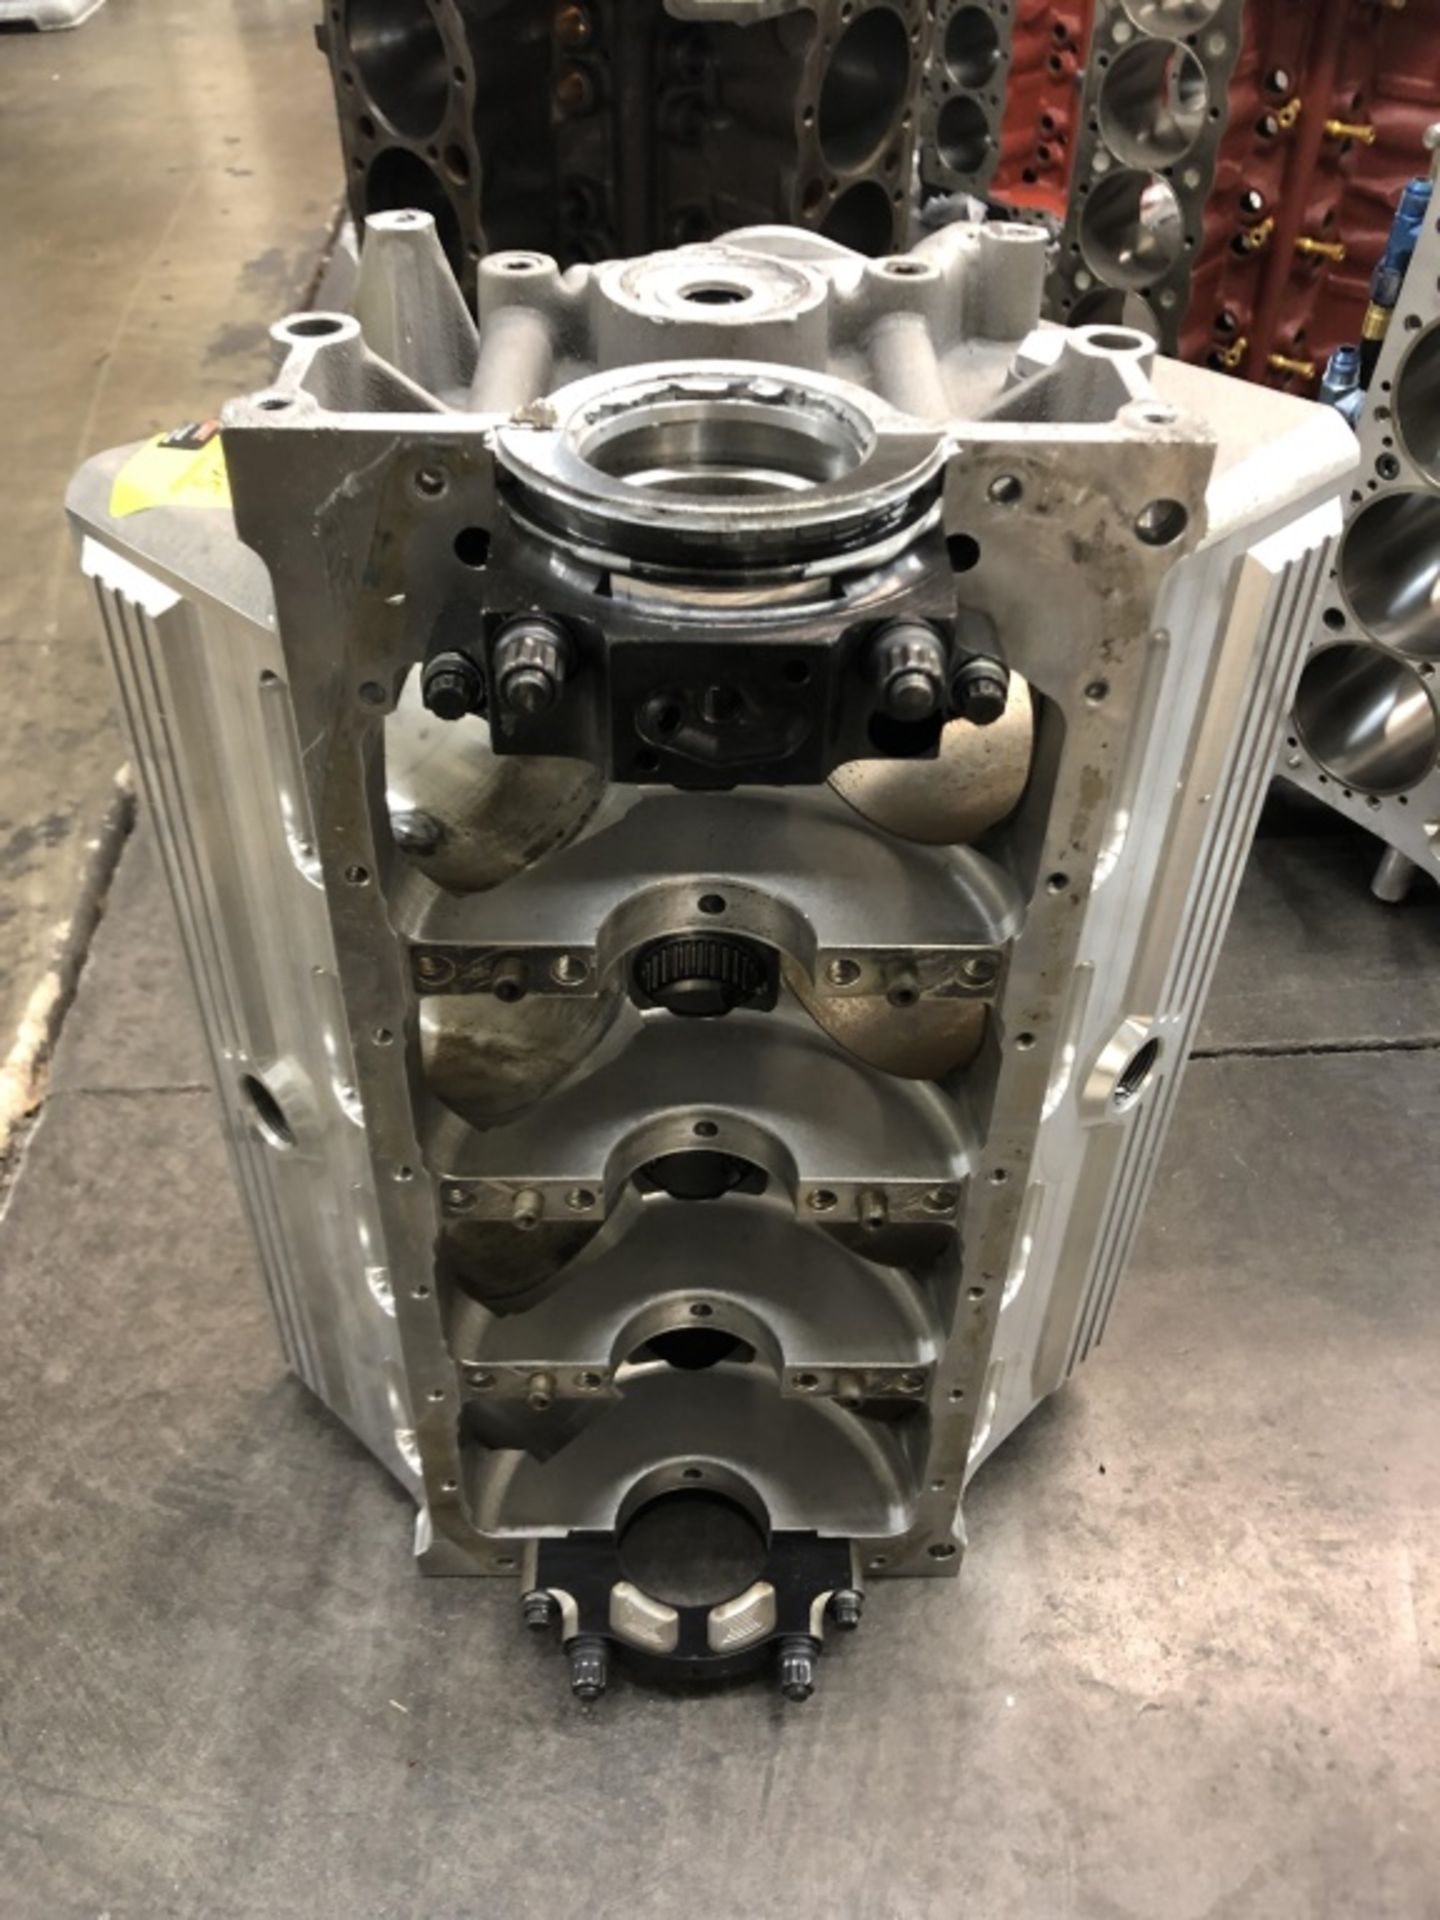 Used Race Engine Block. Unfinished shop project. - Image 2 of 3